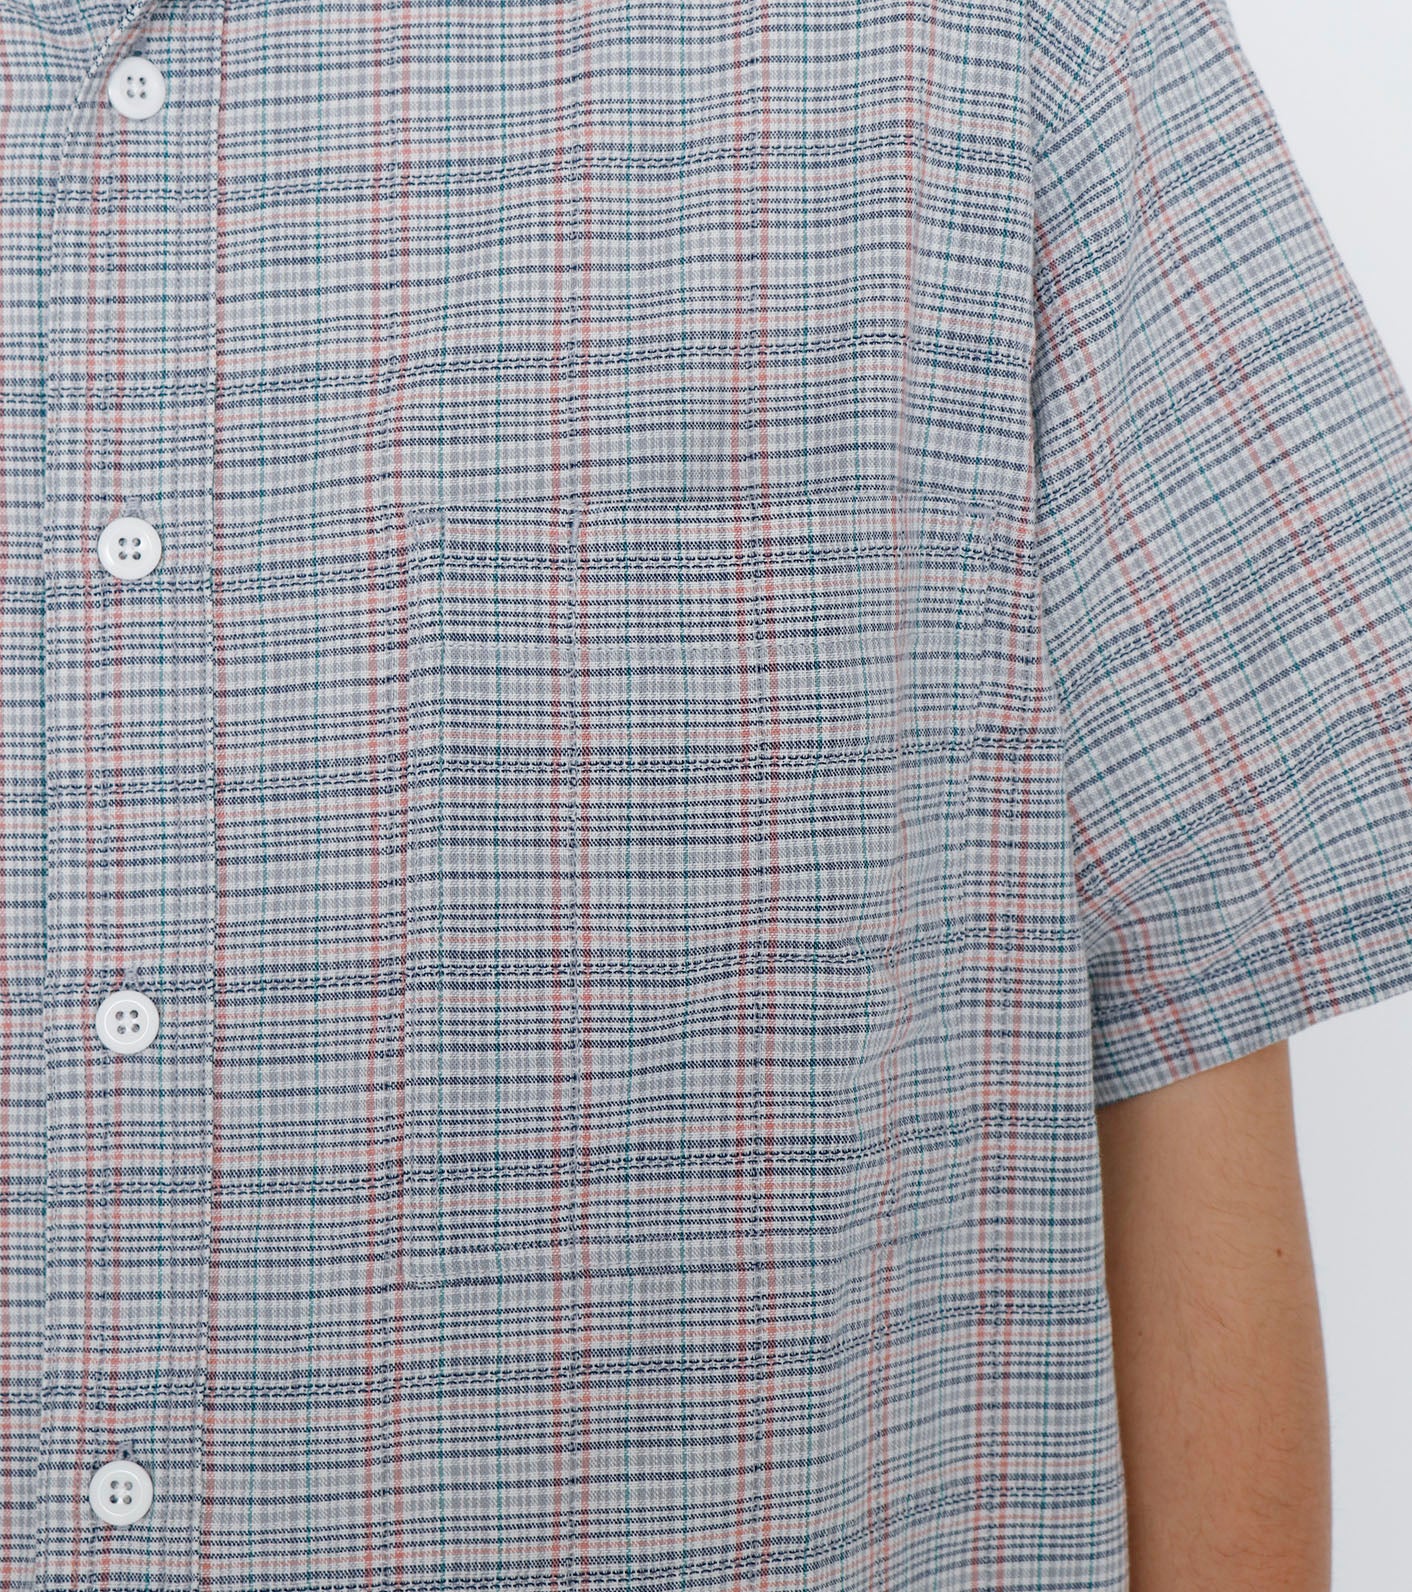 THE NORTH FACE PURPLE LABEL Plaid Dobby Field S/S Shirt